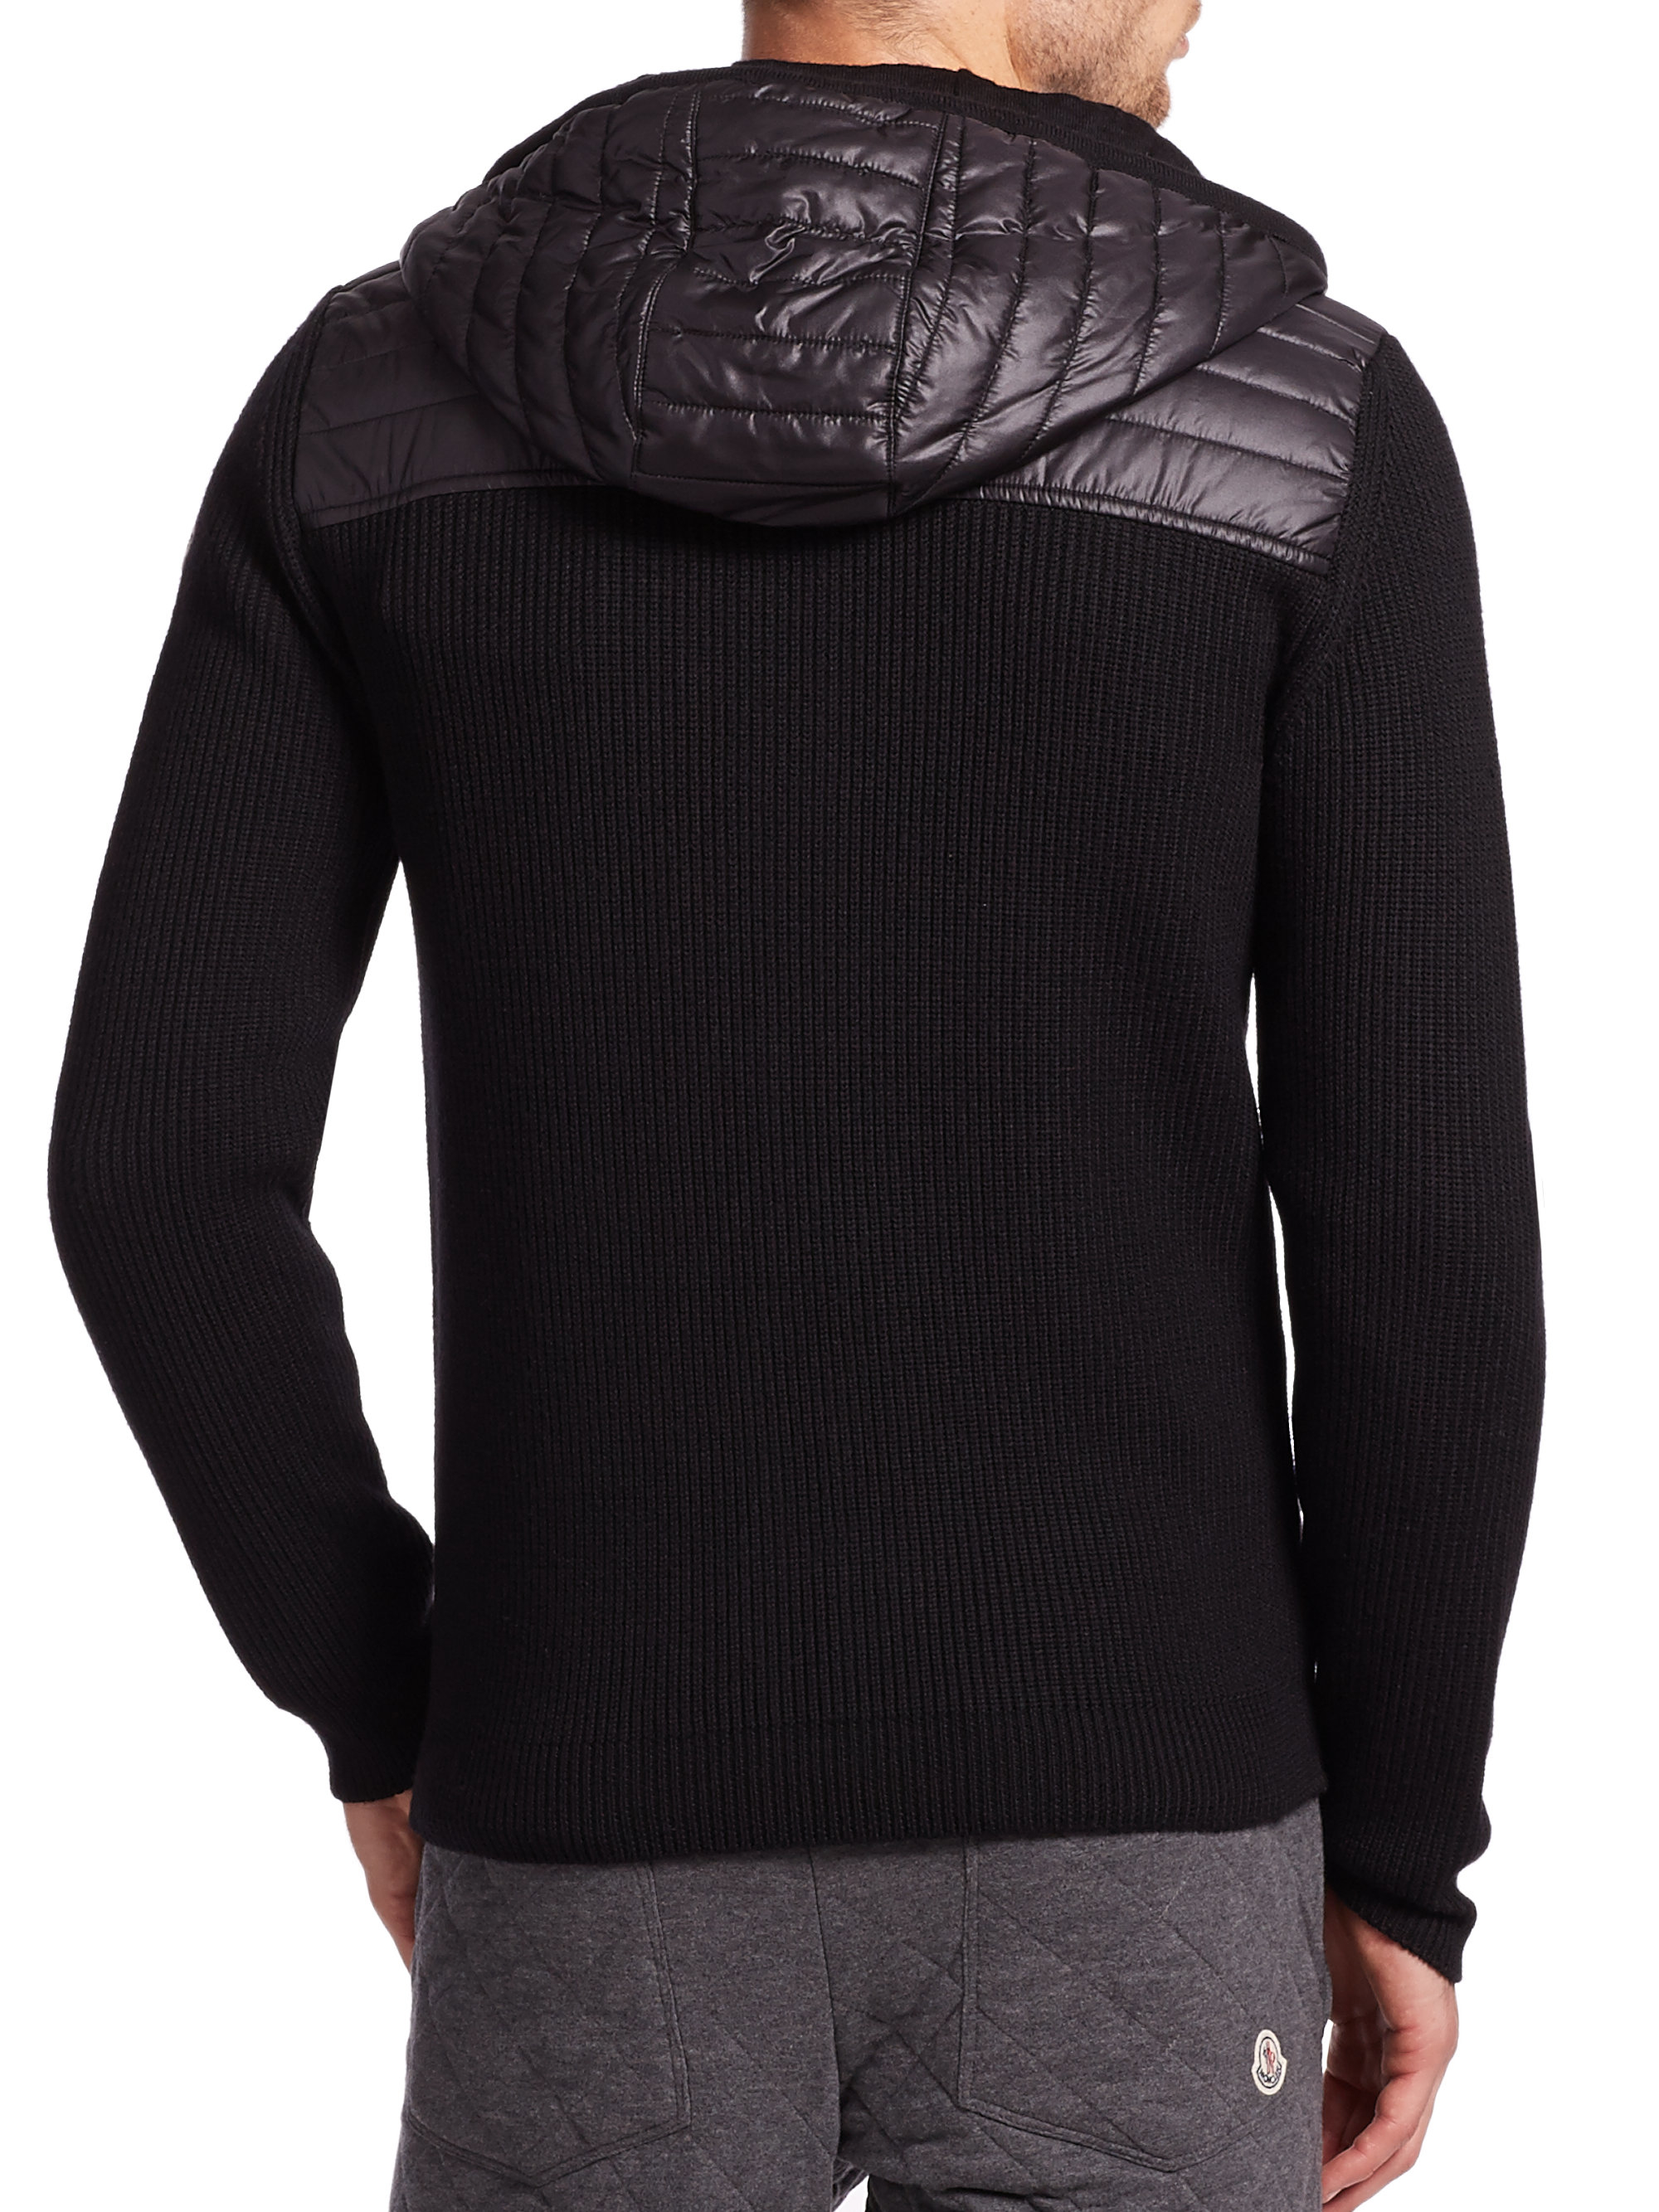 Lyst - Moncler Maglione Mixed-media Zip Sweater in Black for Men